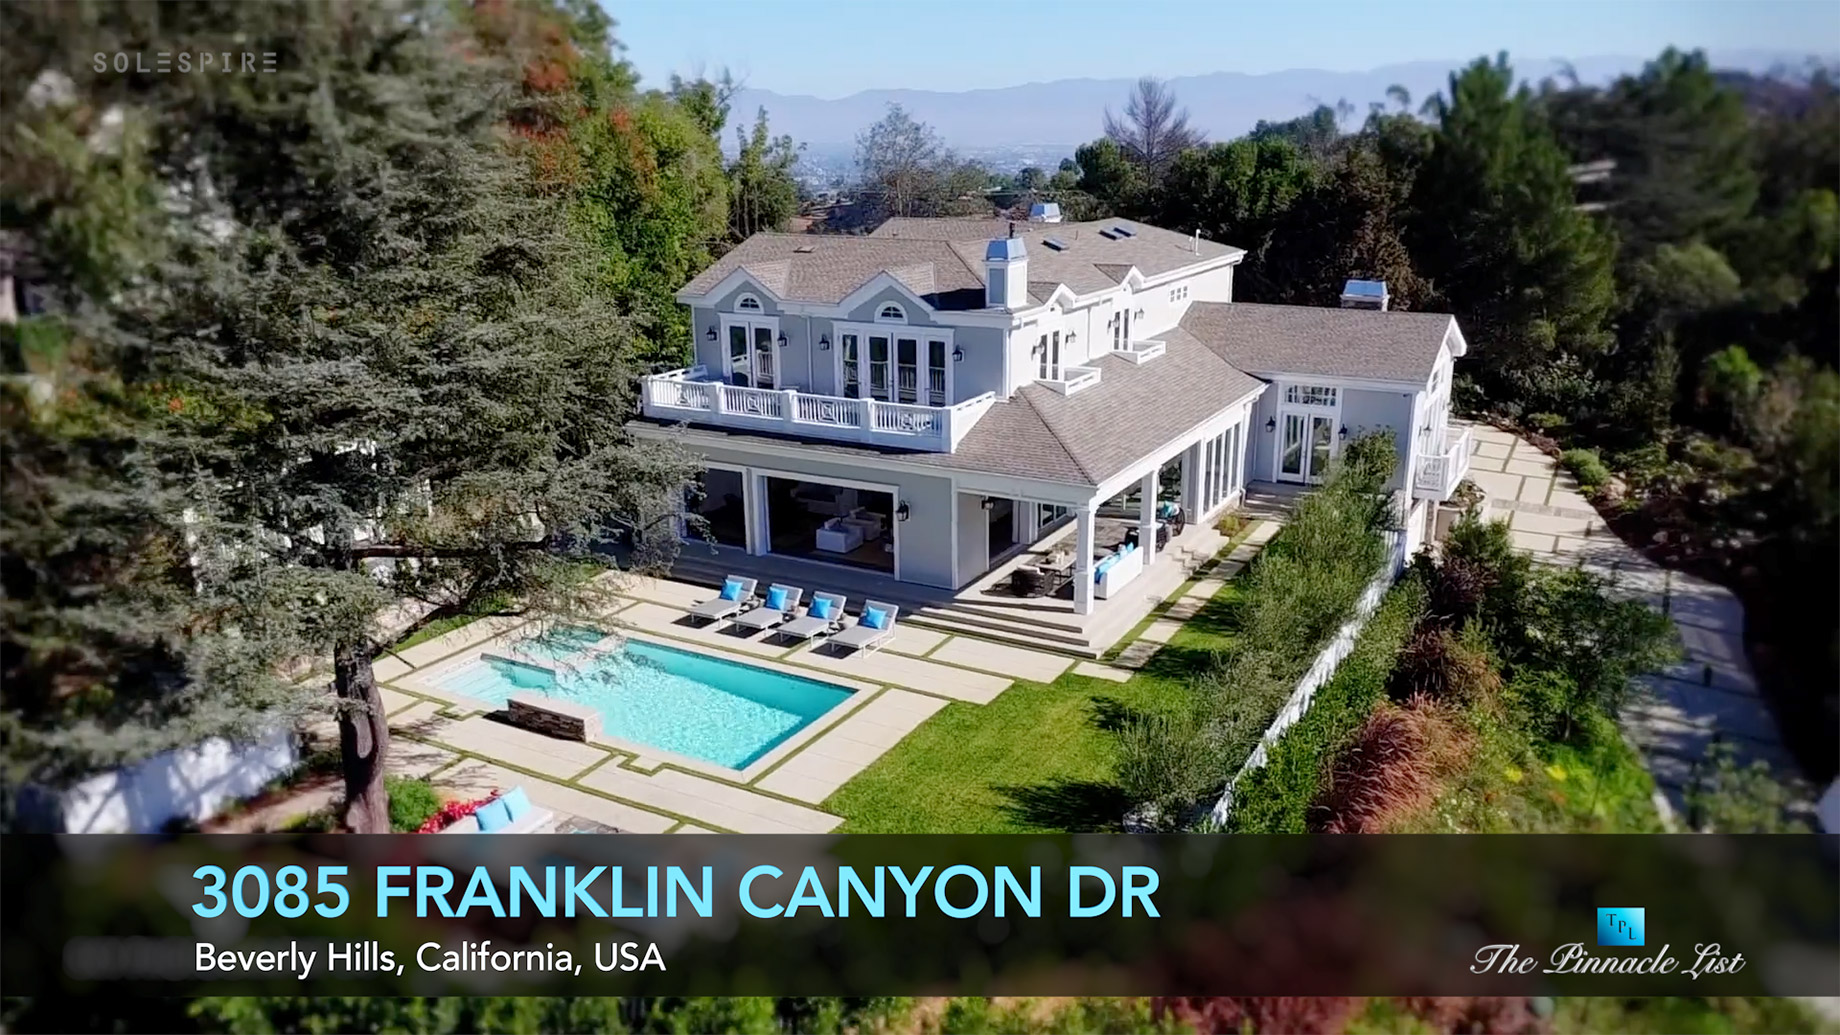 3085 Franklin Canyon Dr, Beverly Hills, CA, USA - Luxury Real Estate